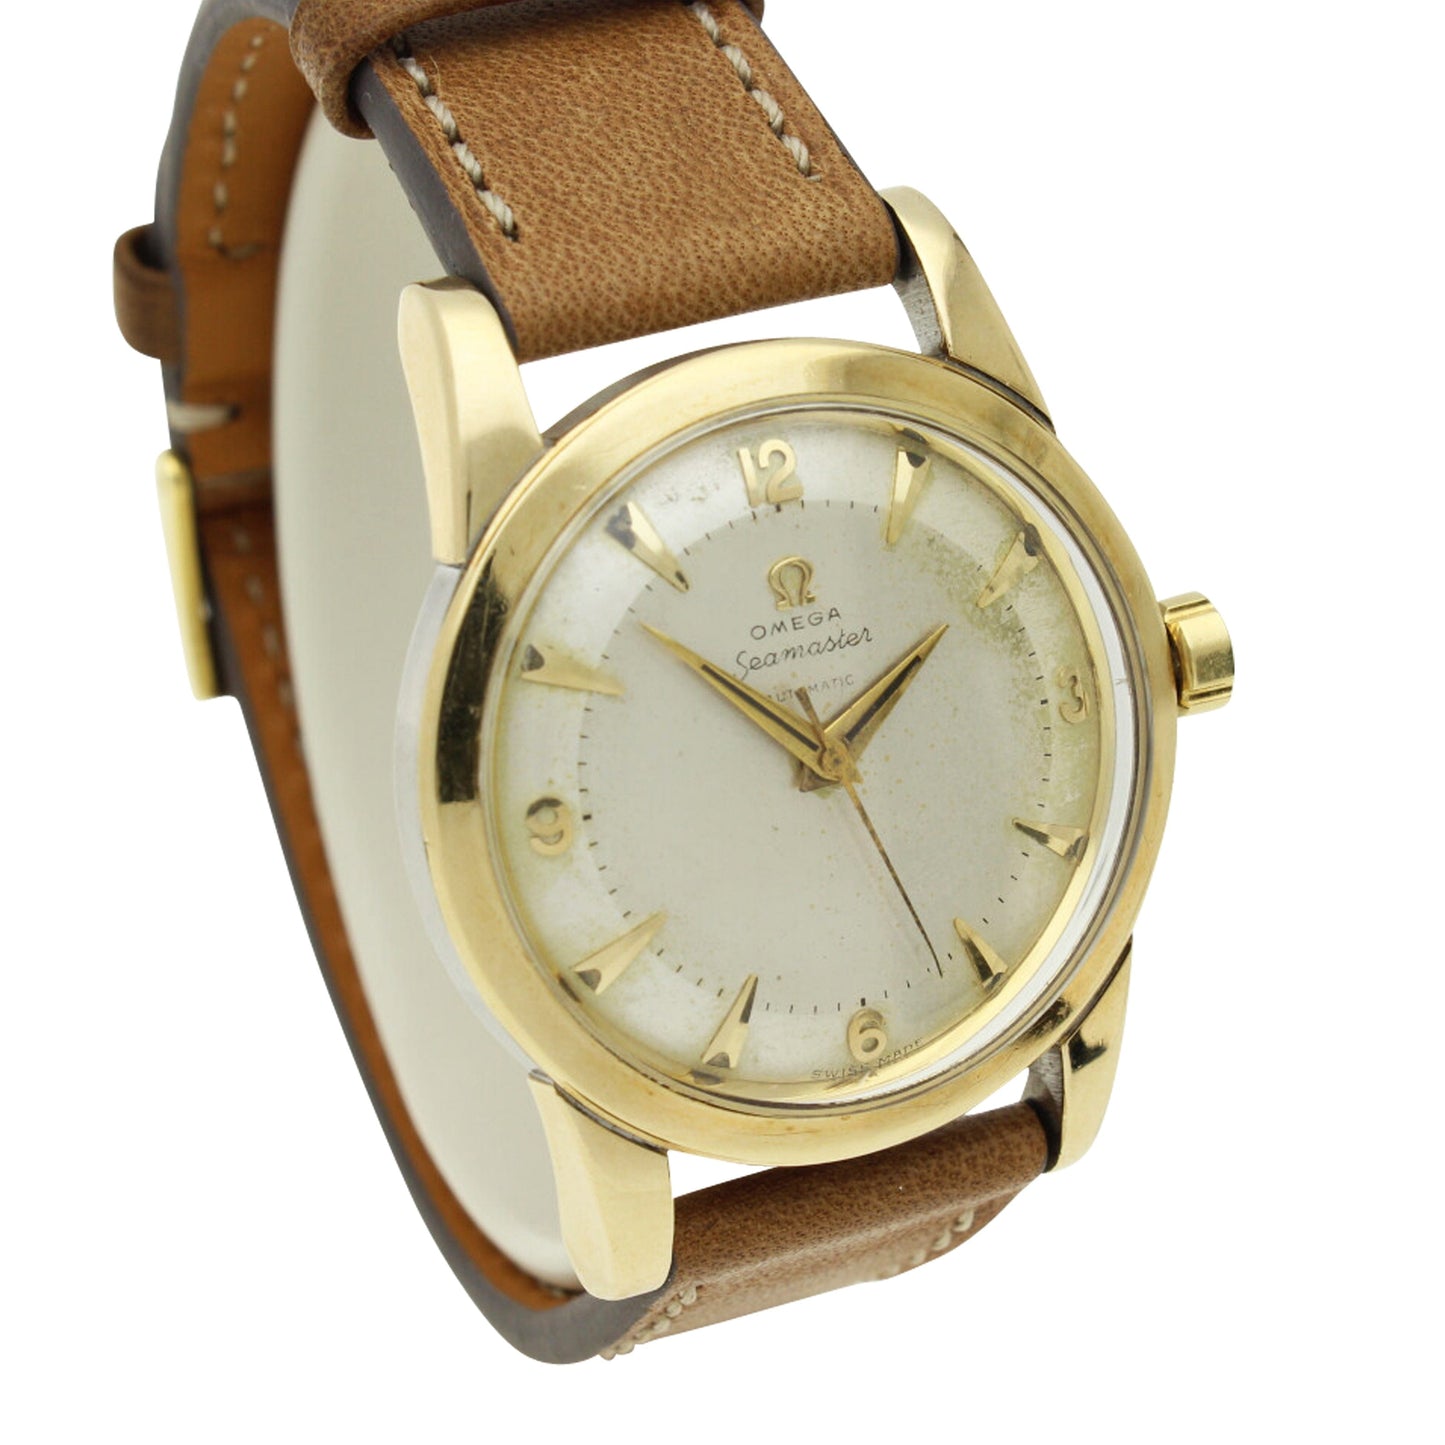 Gold capped & stainless steel Seamaster automatic wristwatch. Made 1952